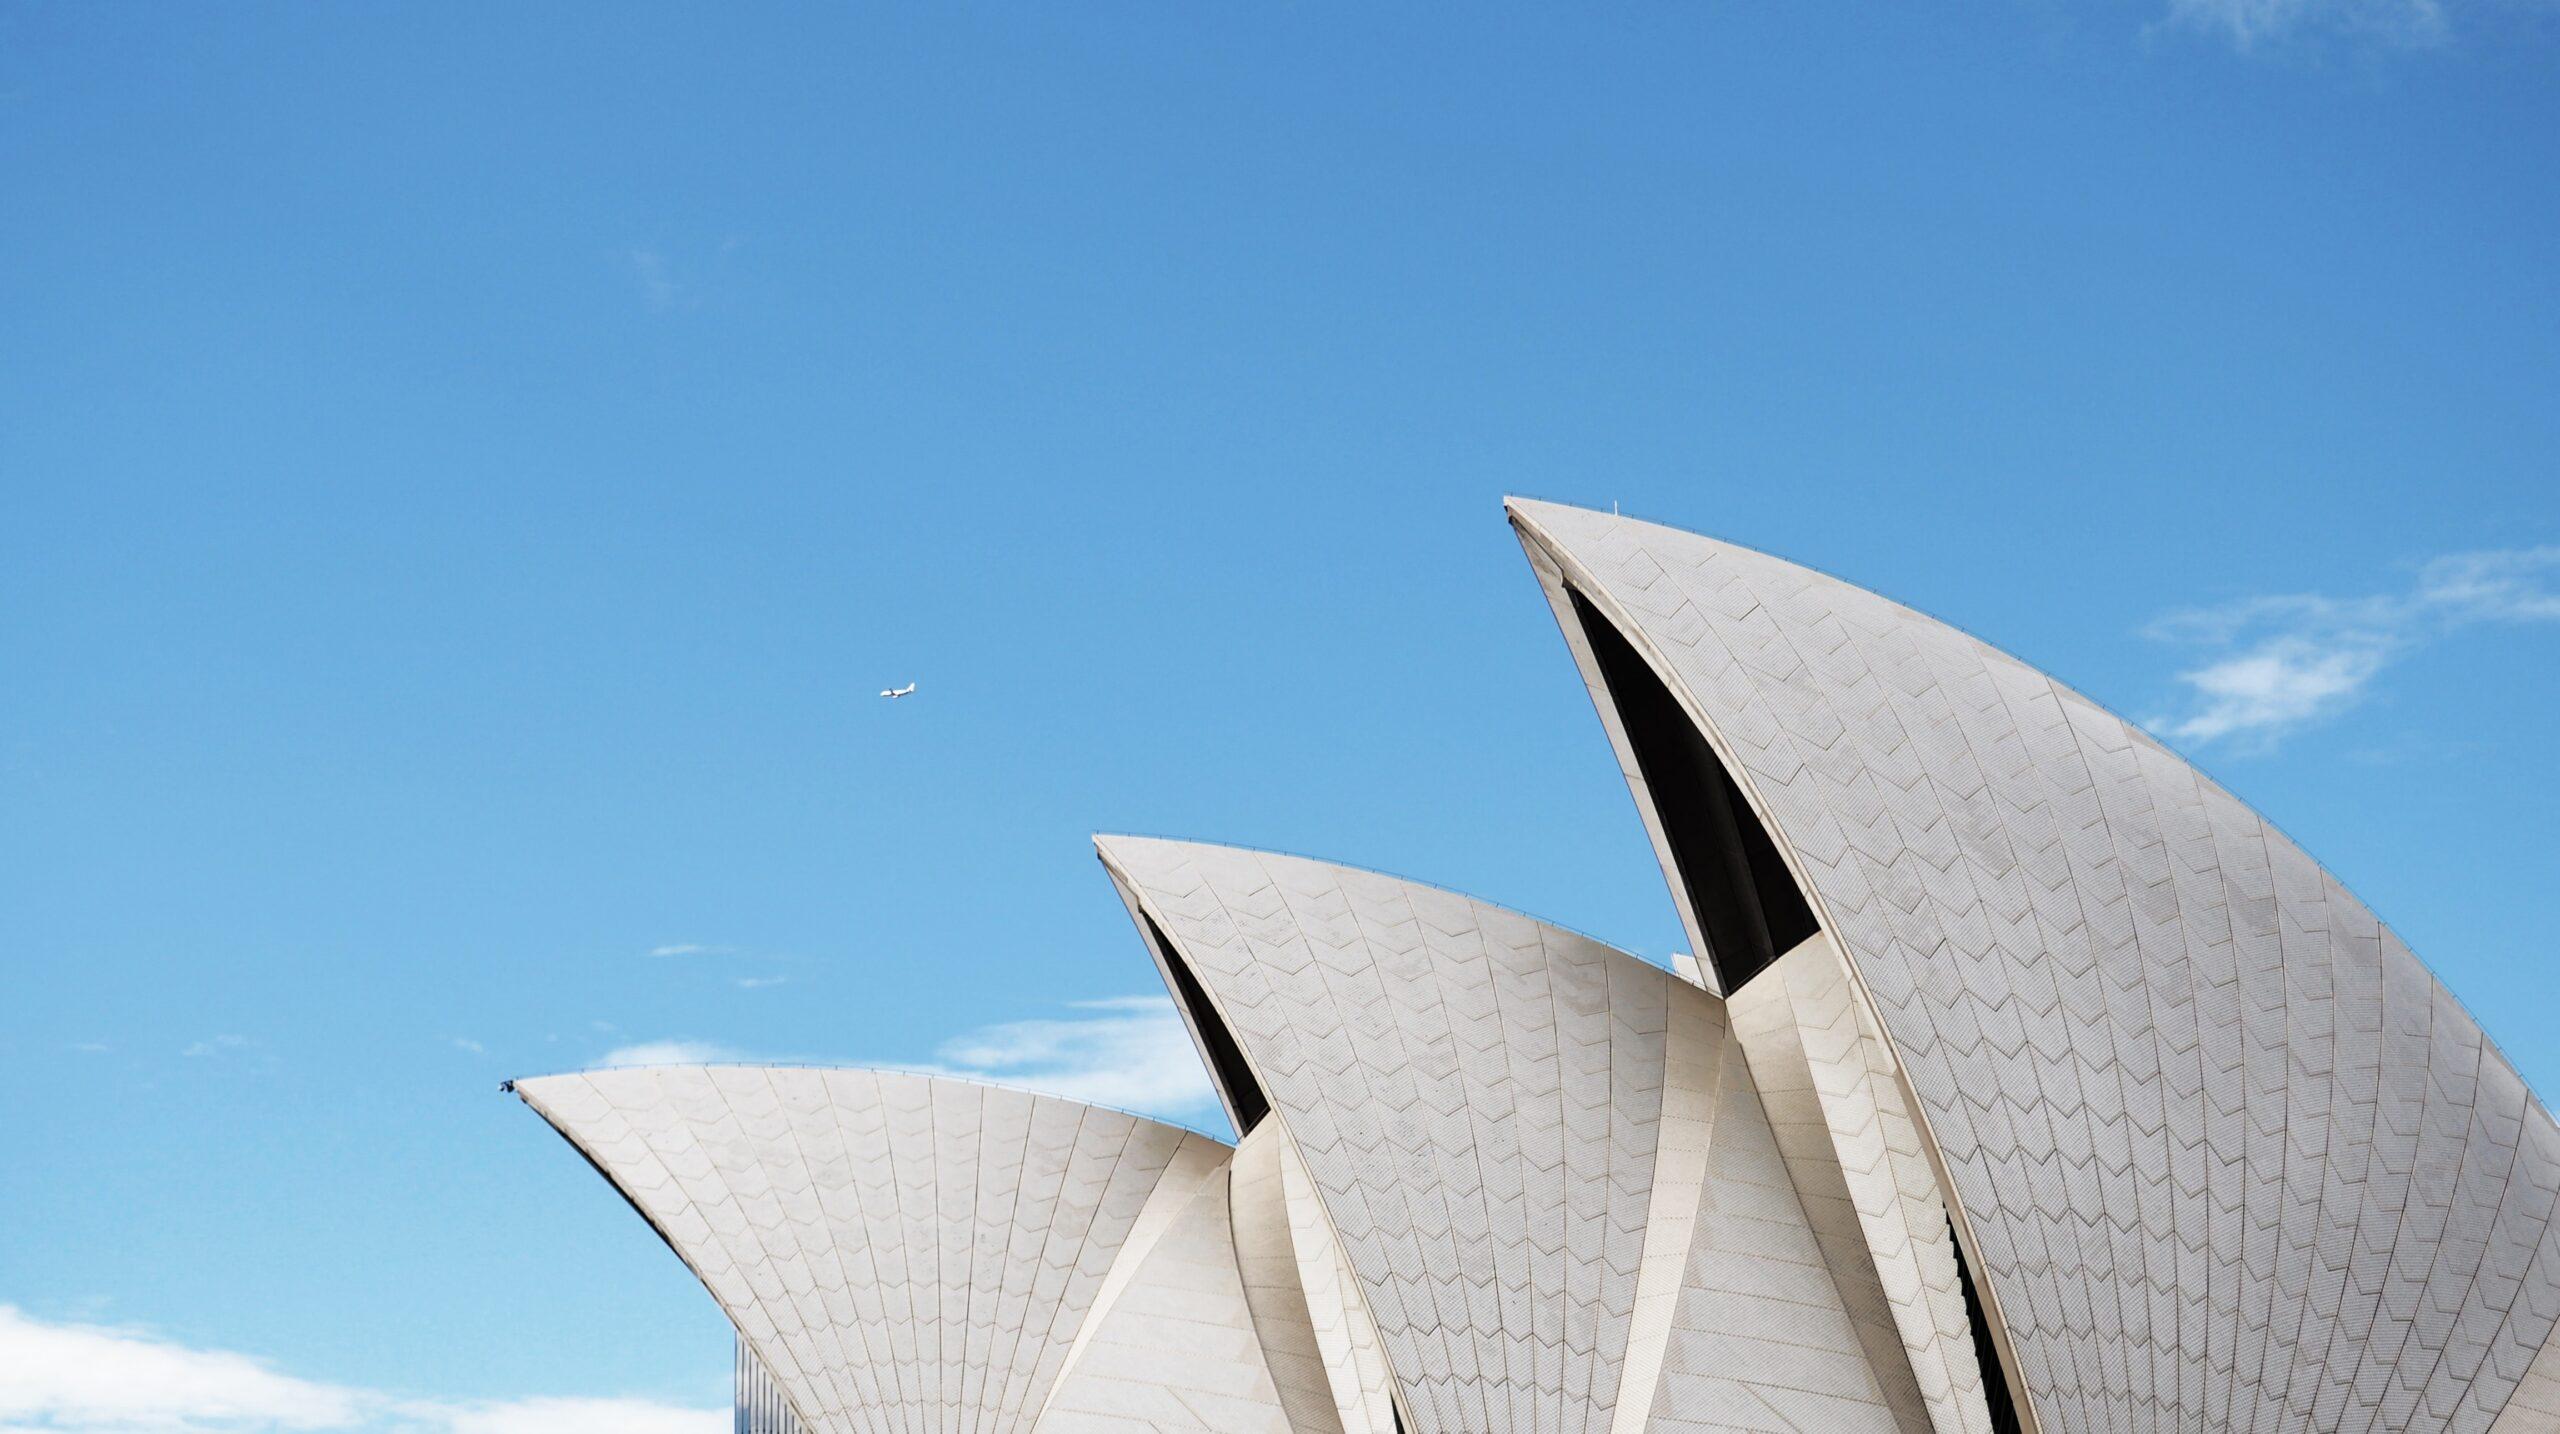 A close-up of the 'sails' of the Sydney Opera House.